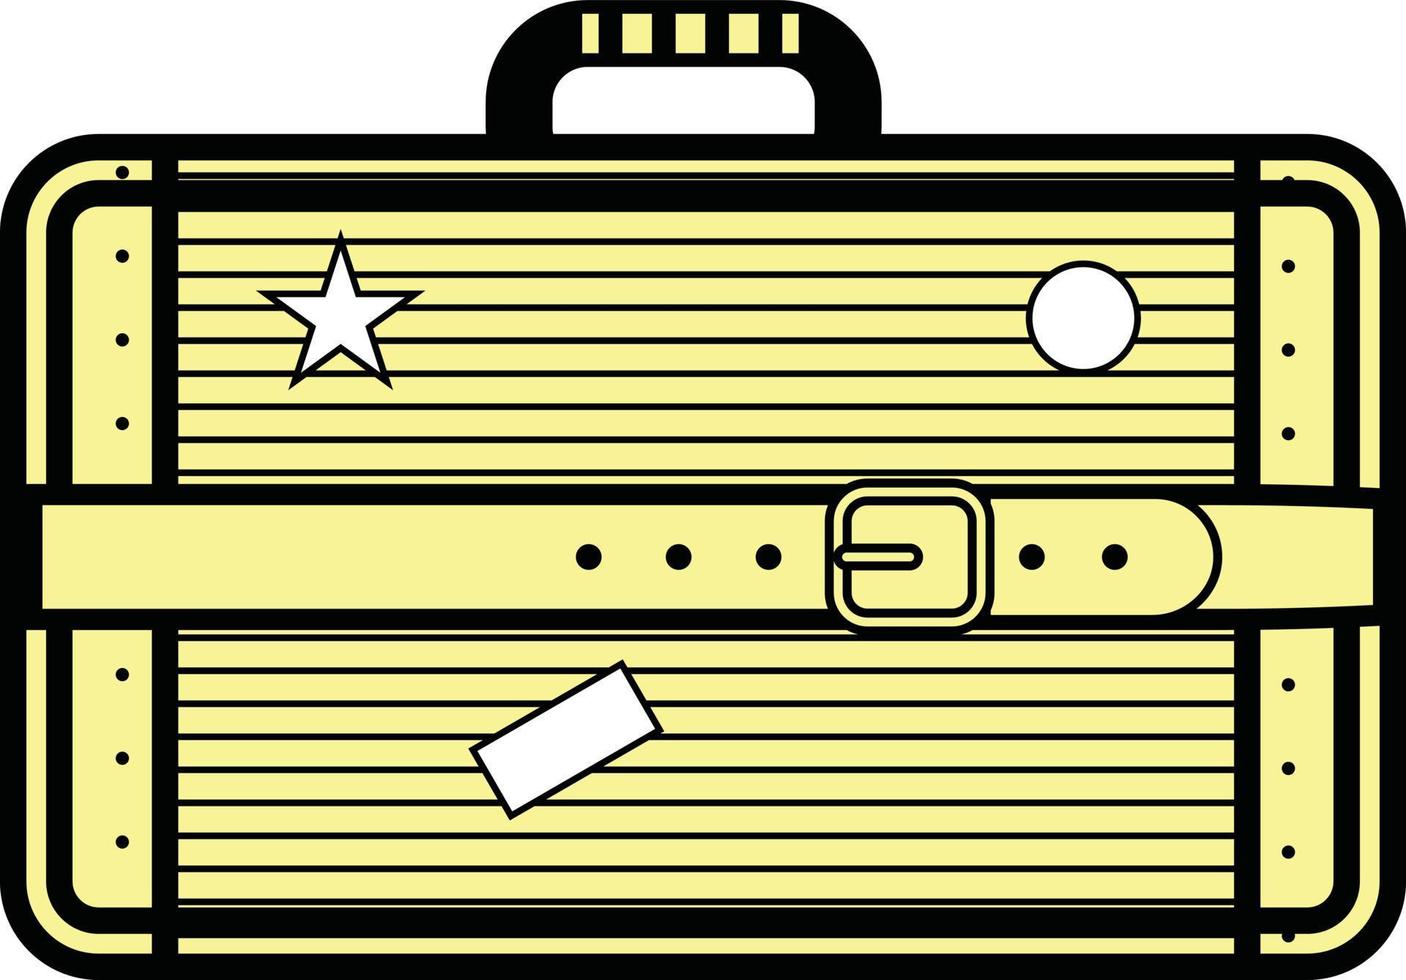 Vector Image Of A Suitcase With A Leather Belt In The Middle